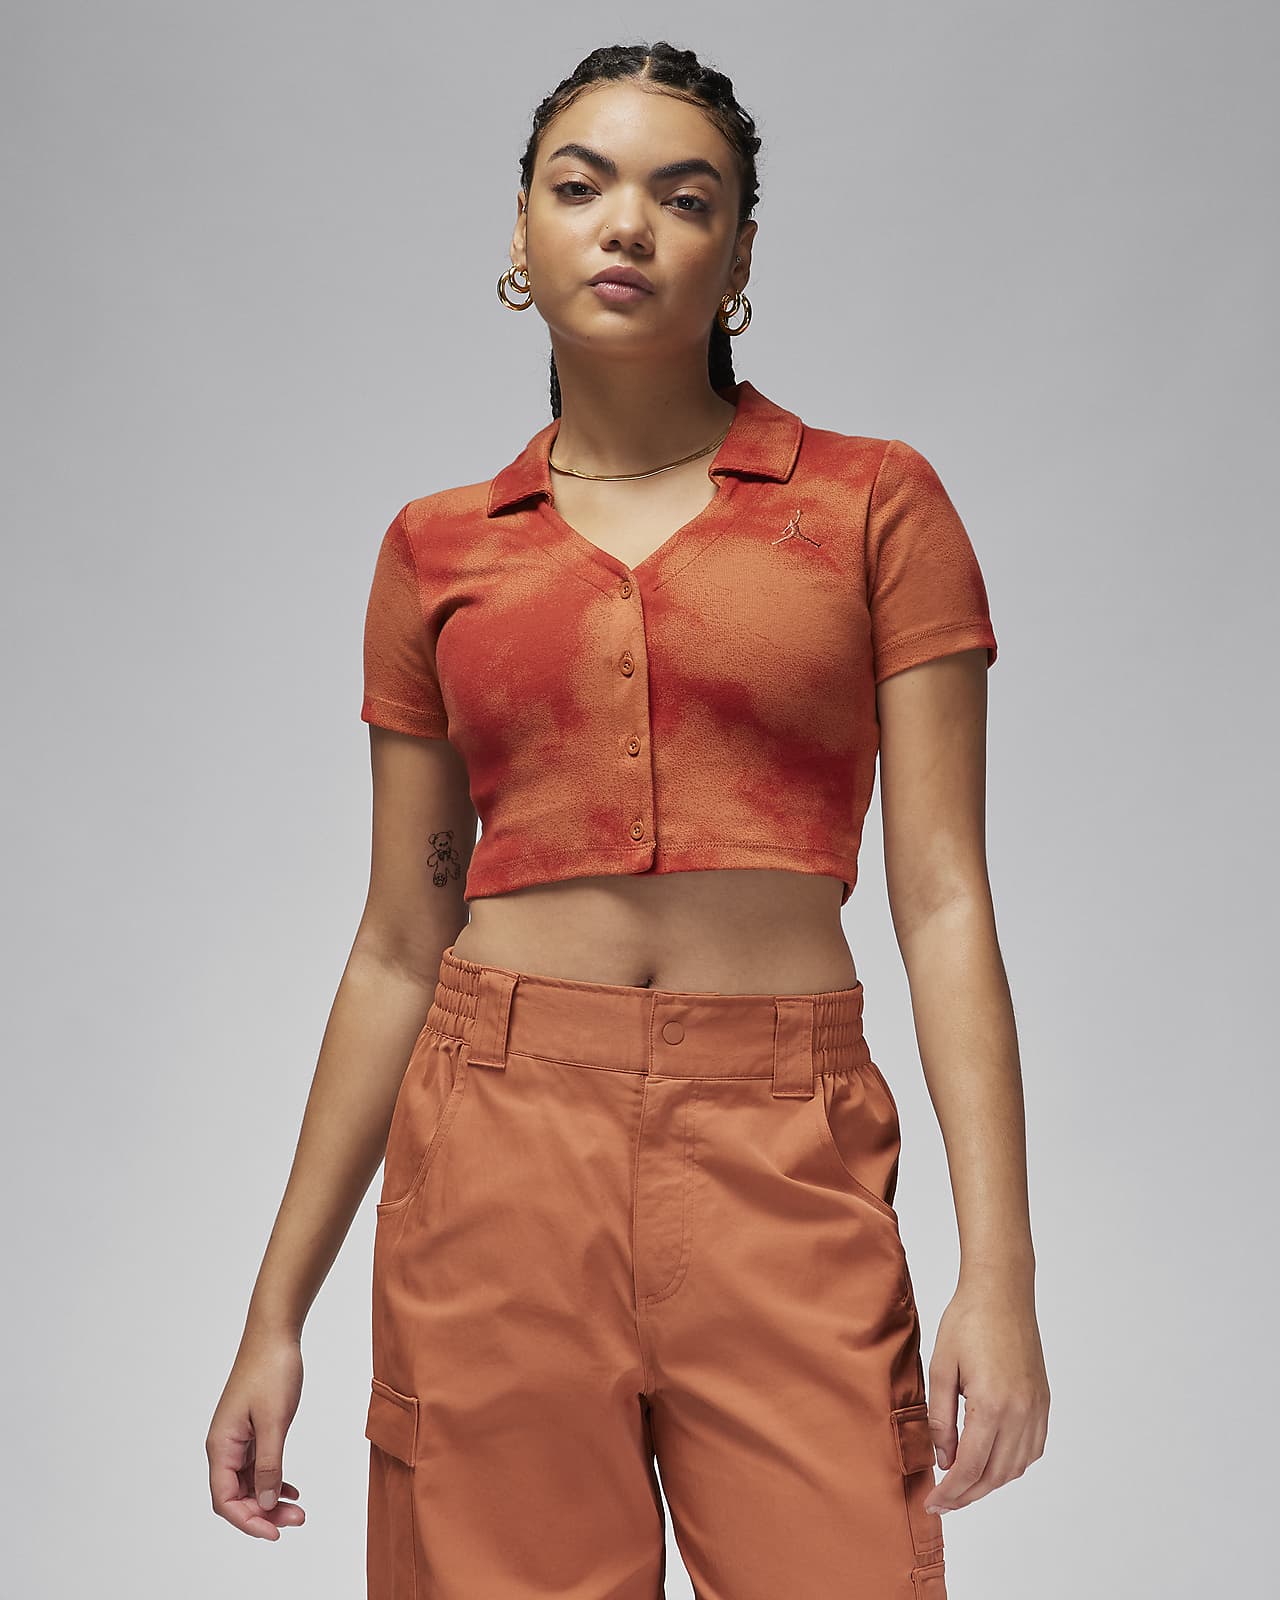 Knitted crop top - Oz Importations